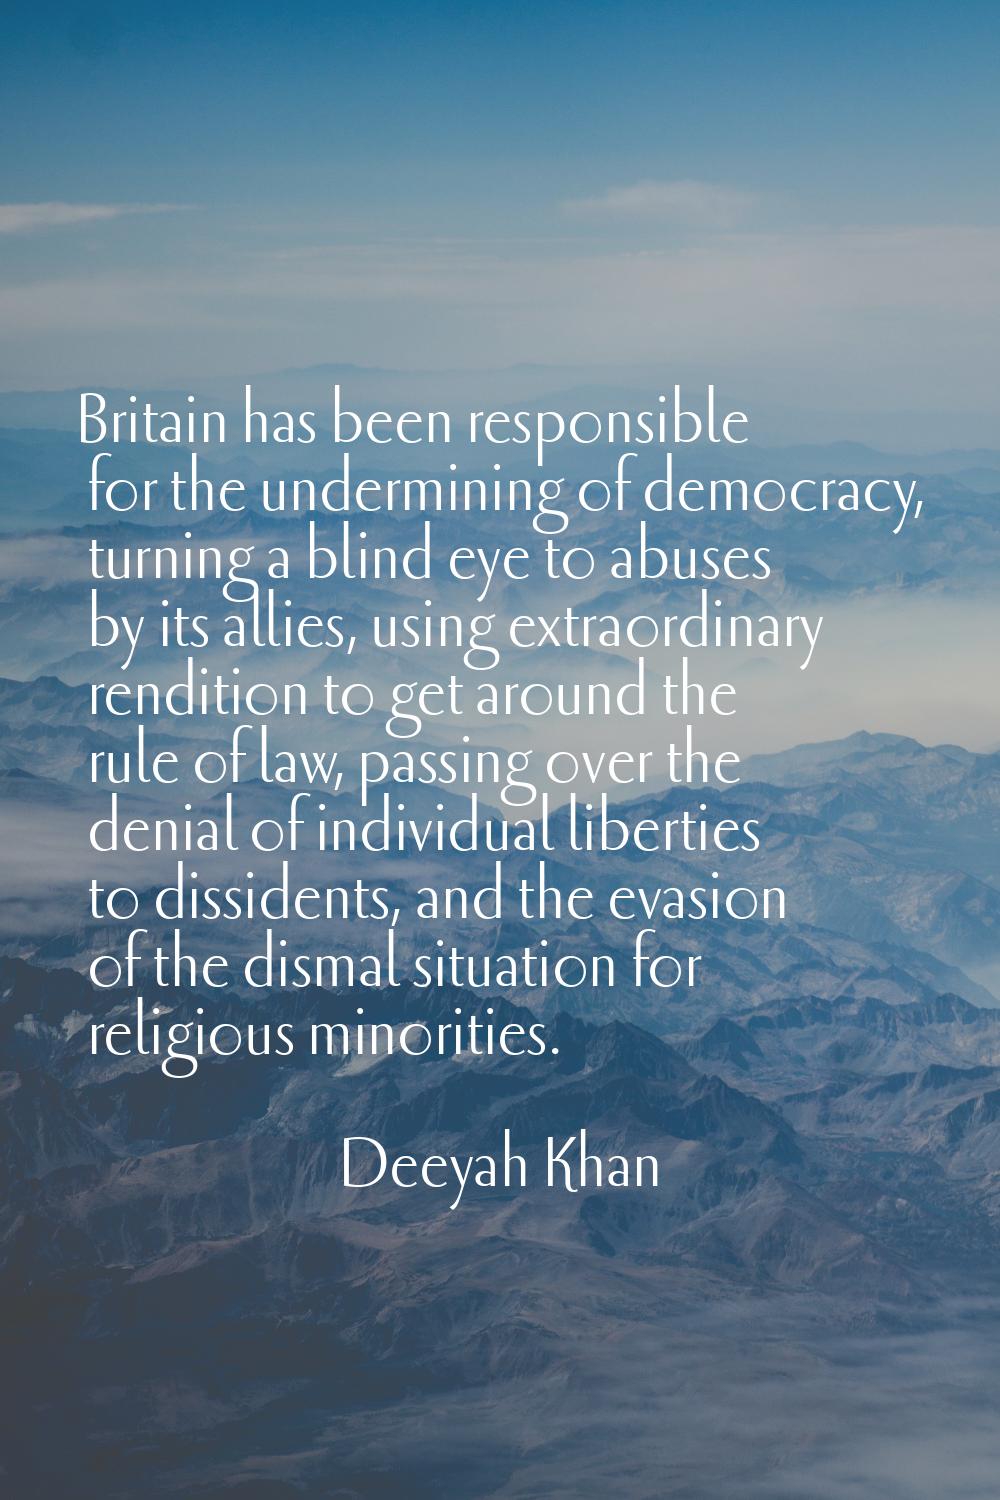 Britain has been responsible for the undermining of democracy, turning a blind eye to abuses by its